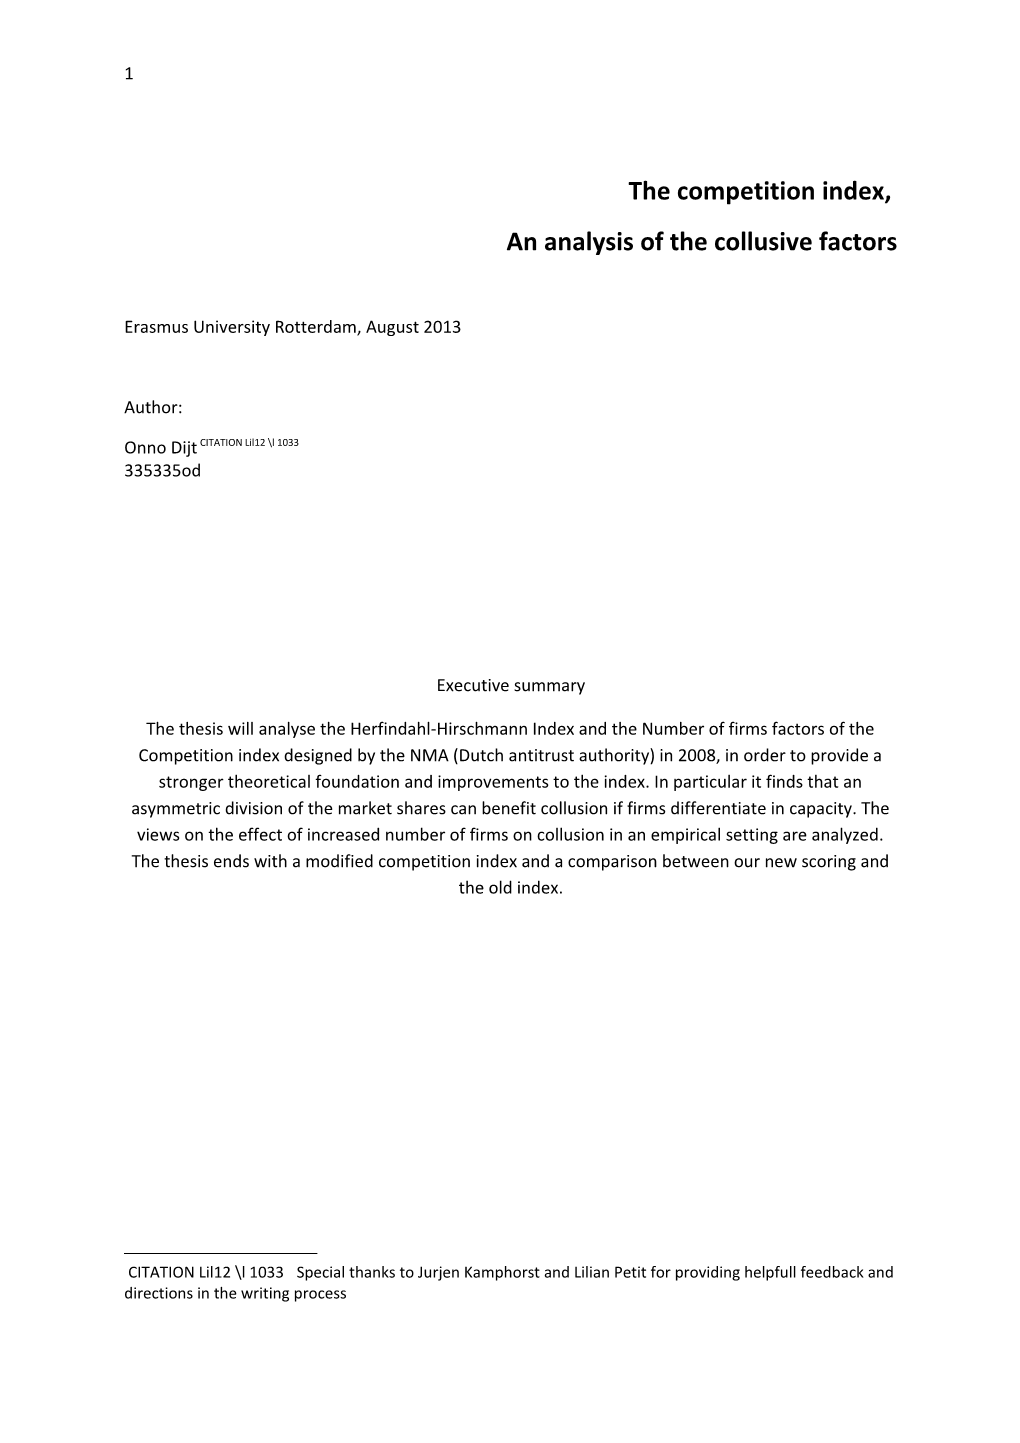 An Analysis of the Collusive Factors